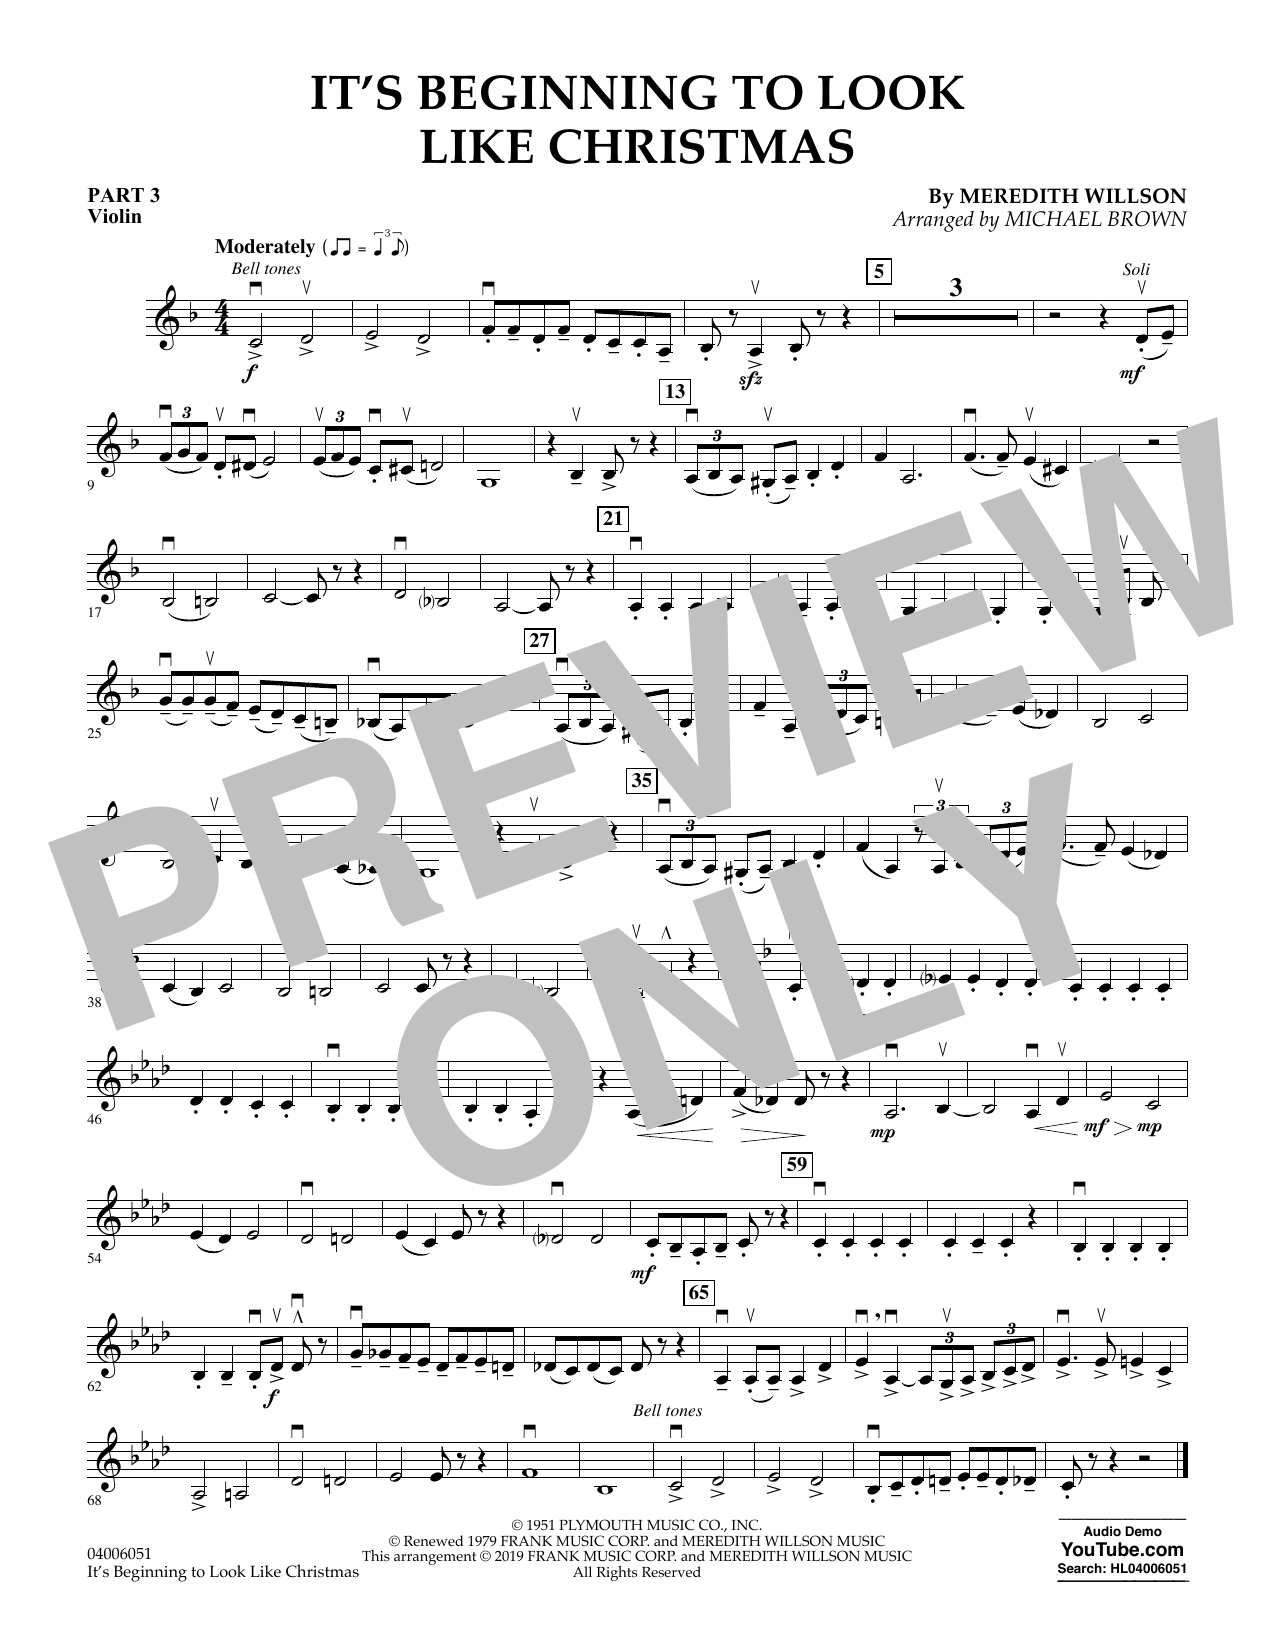 Meredith Willson It's Beginning to Look Like Christmas (arr. Michael Brown) - Pt.3 - Violin sheet music preview music notes and score for Concert Band including 1 page(s)